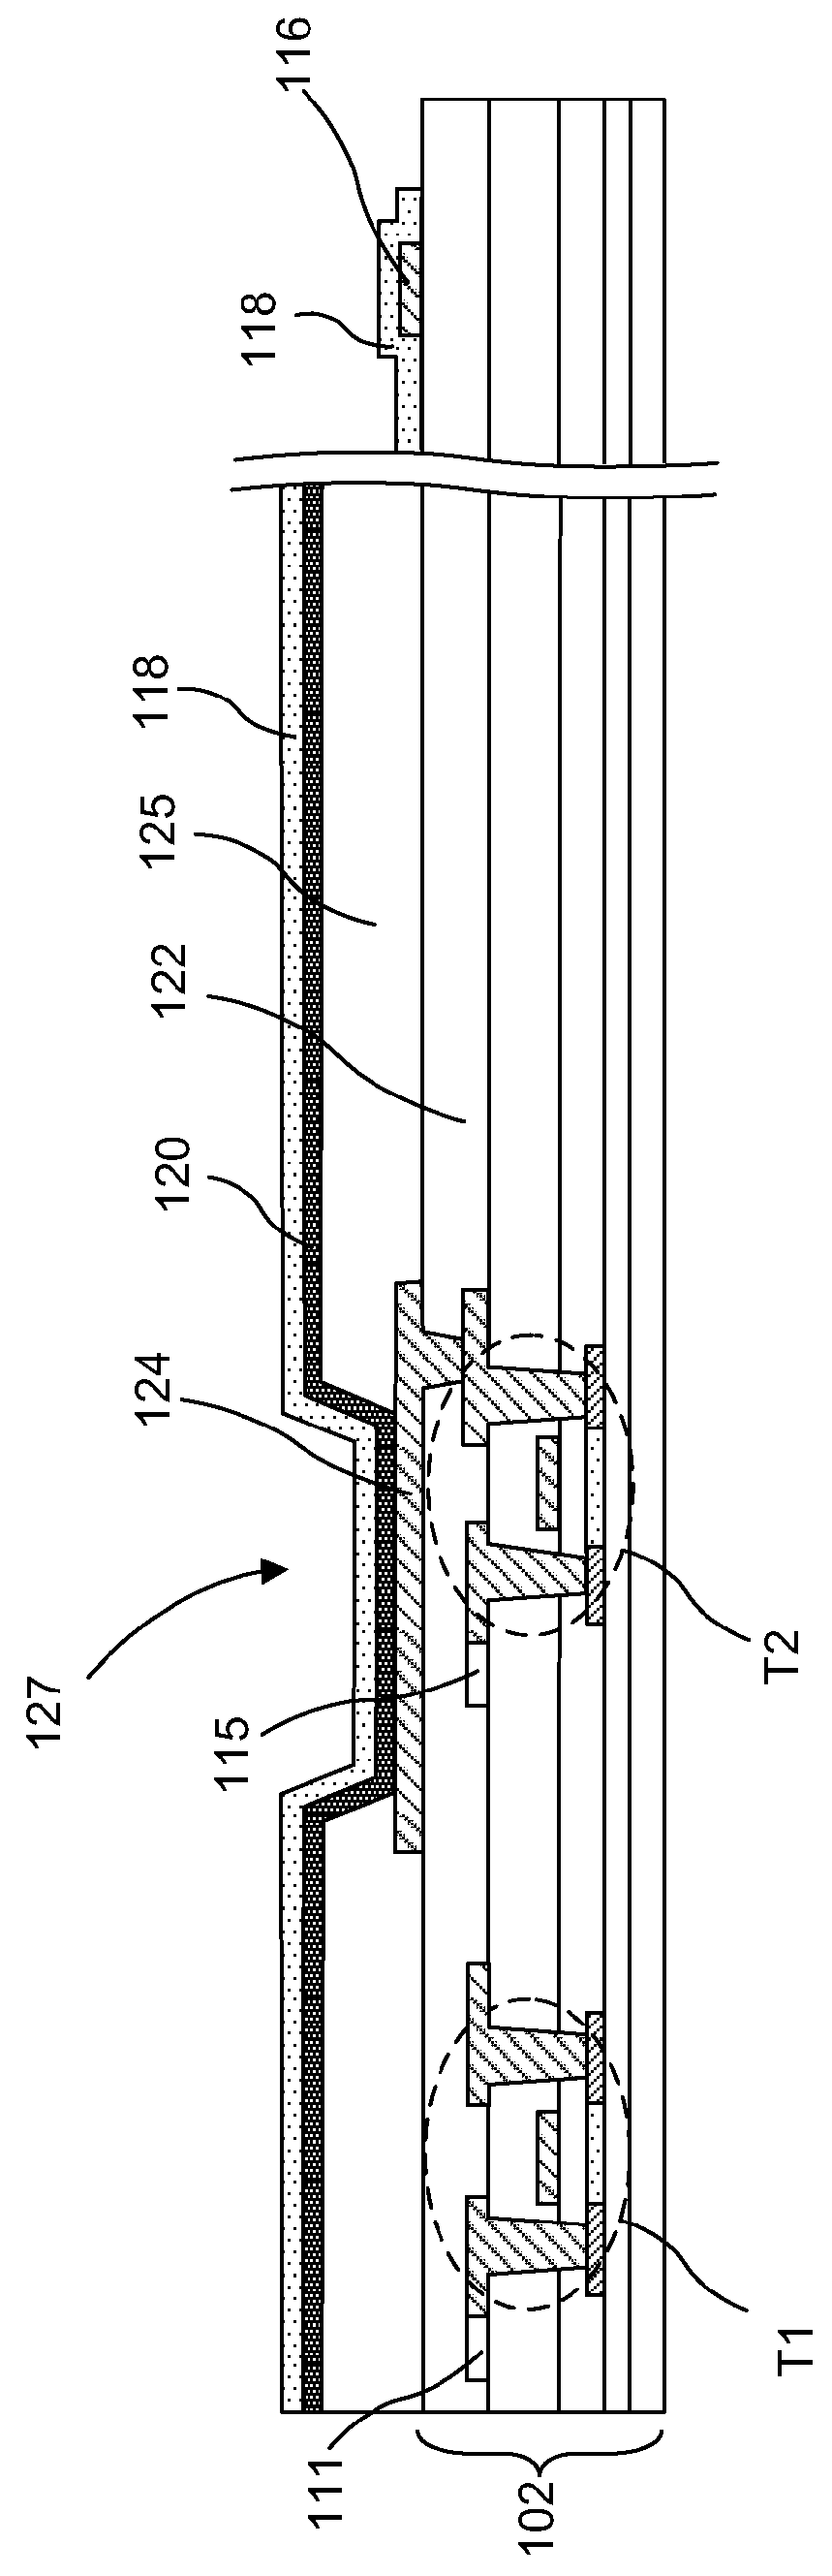 Method of fabricating a light emitting diode display with integrated defect detection test